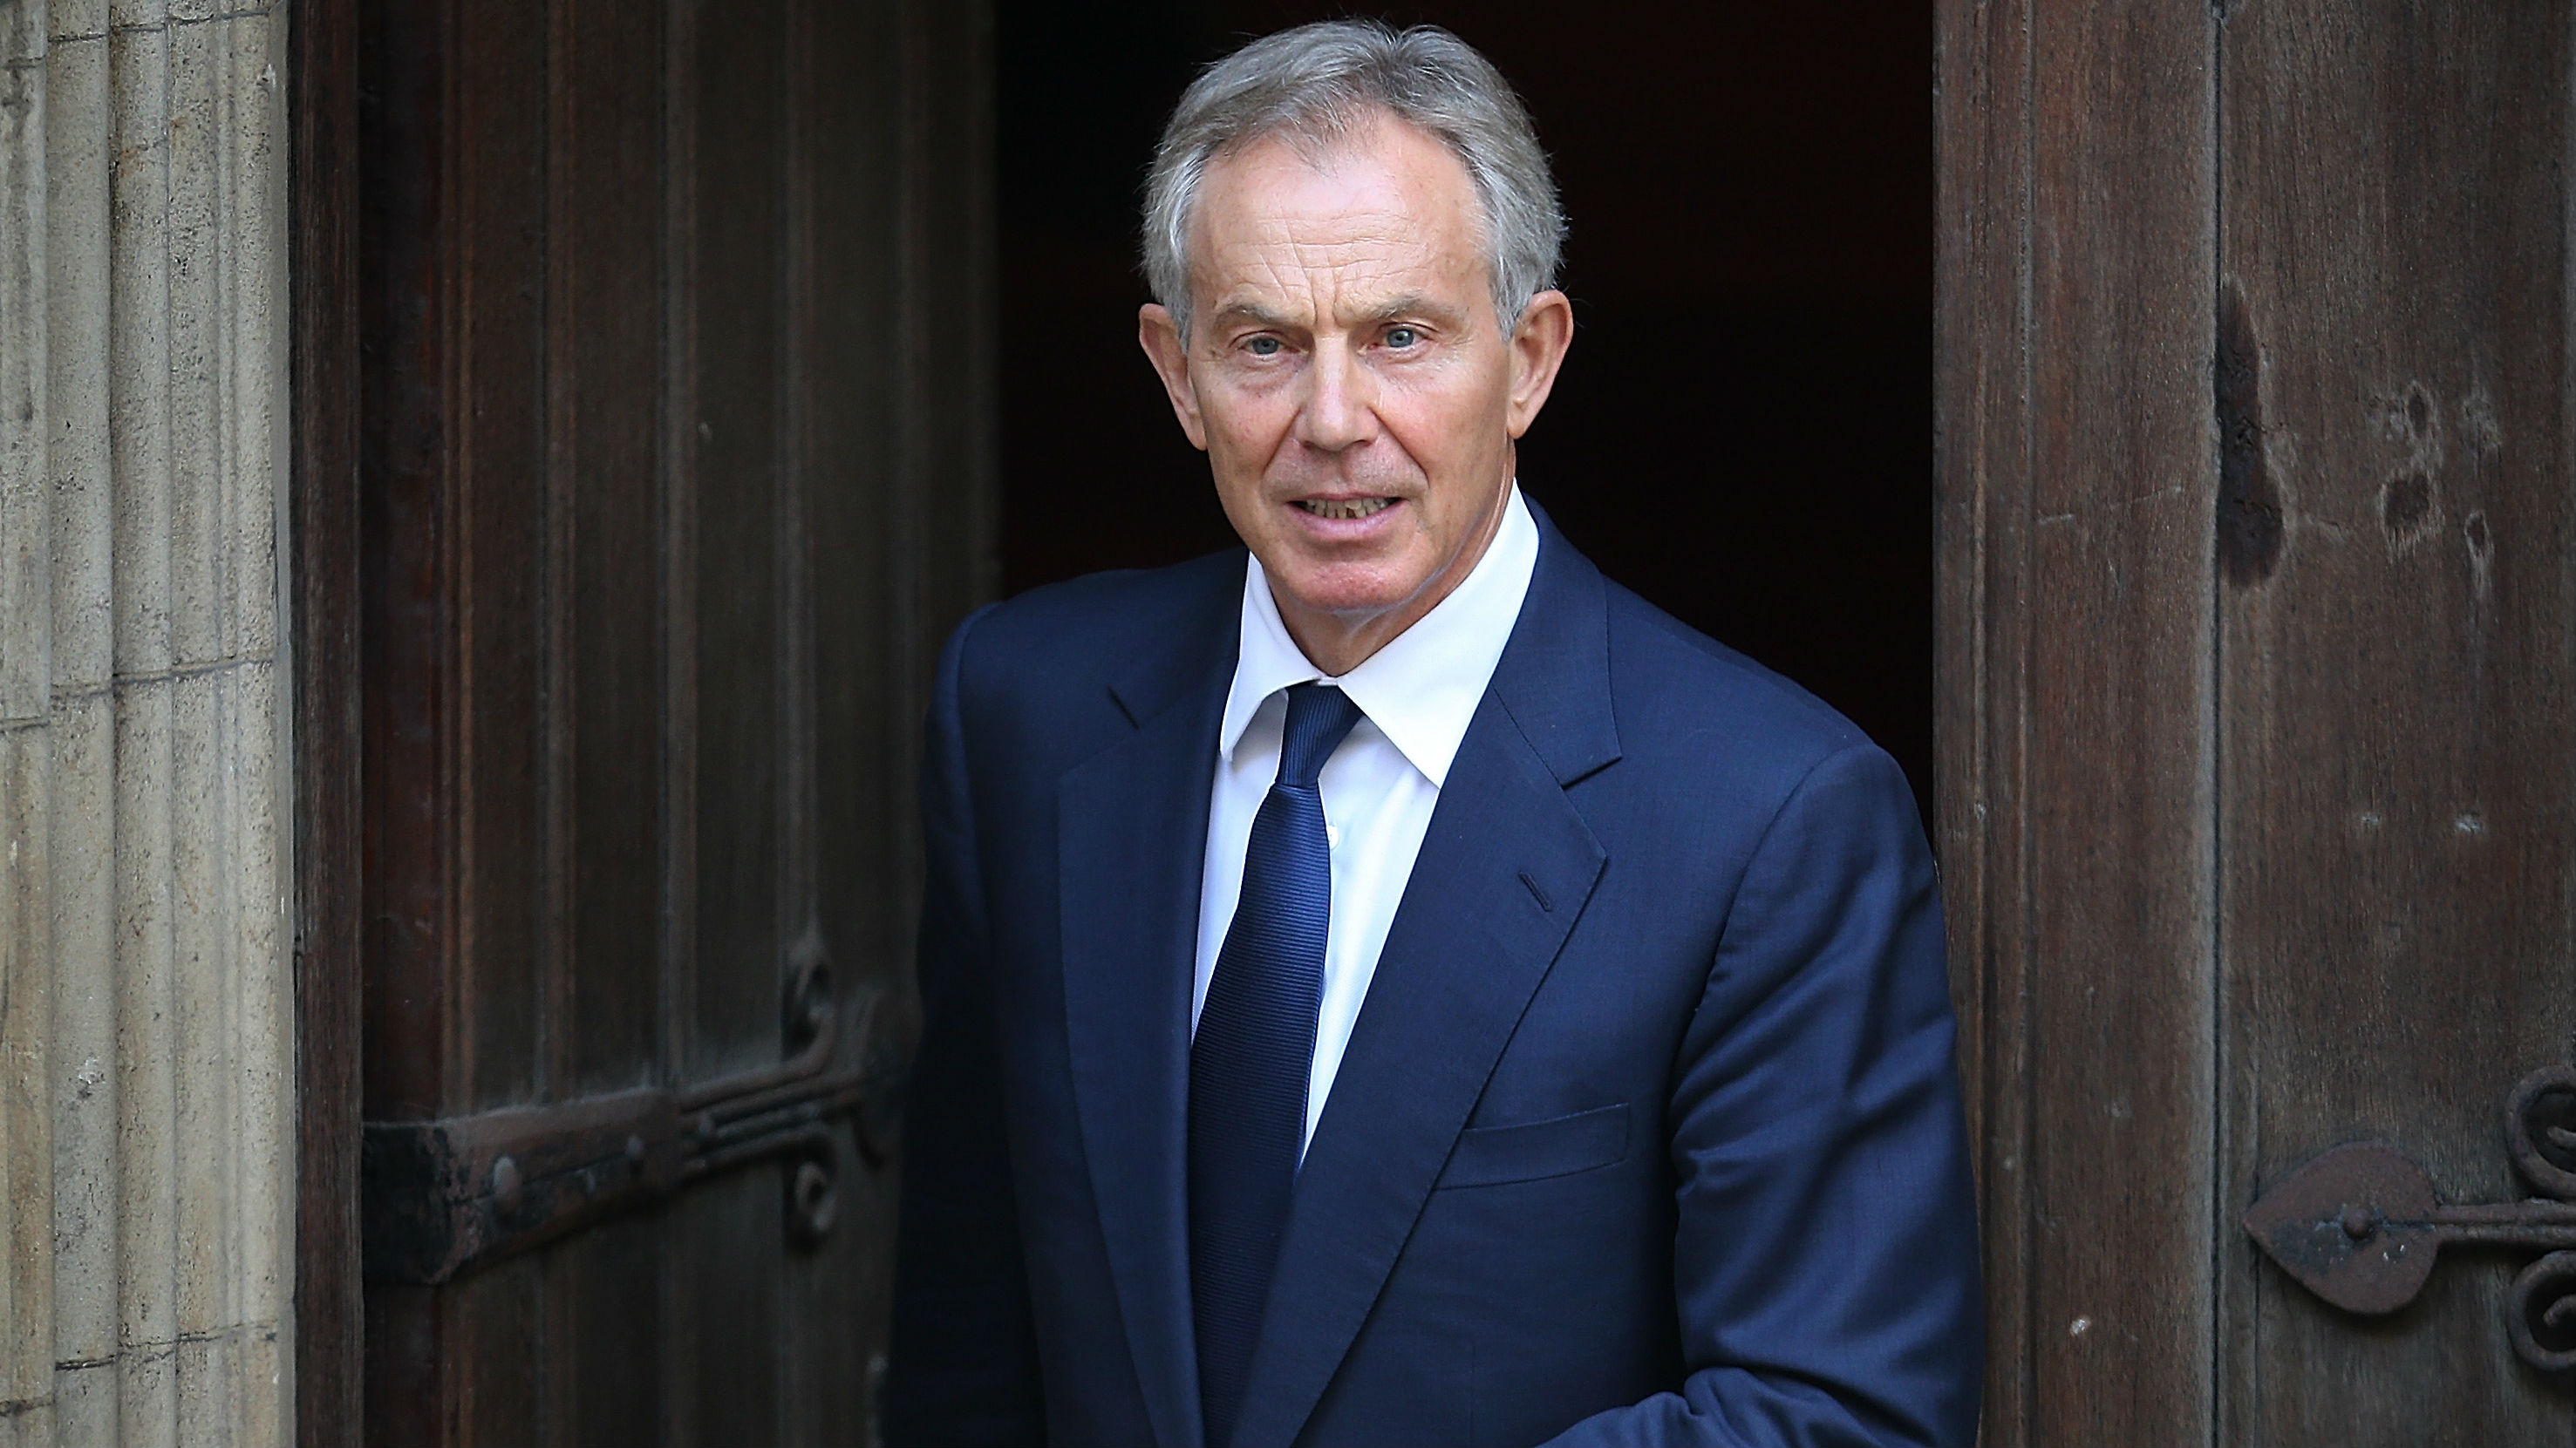 Tony Blair allegedly made the claim to Trump’s son-in-law during a White House visit 